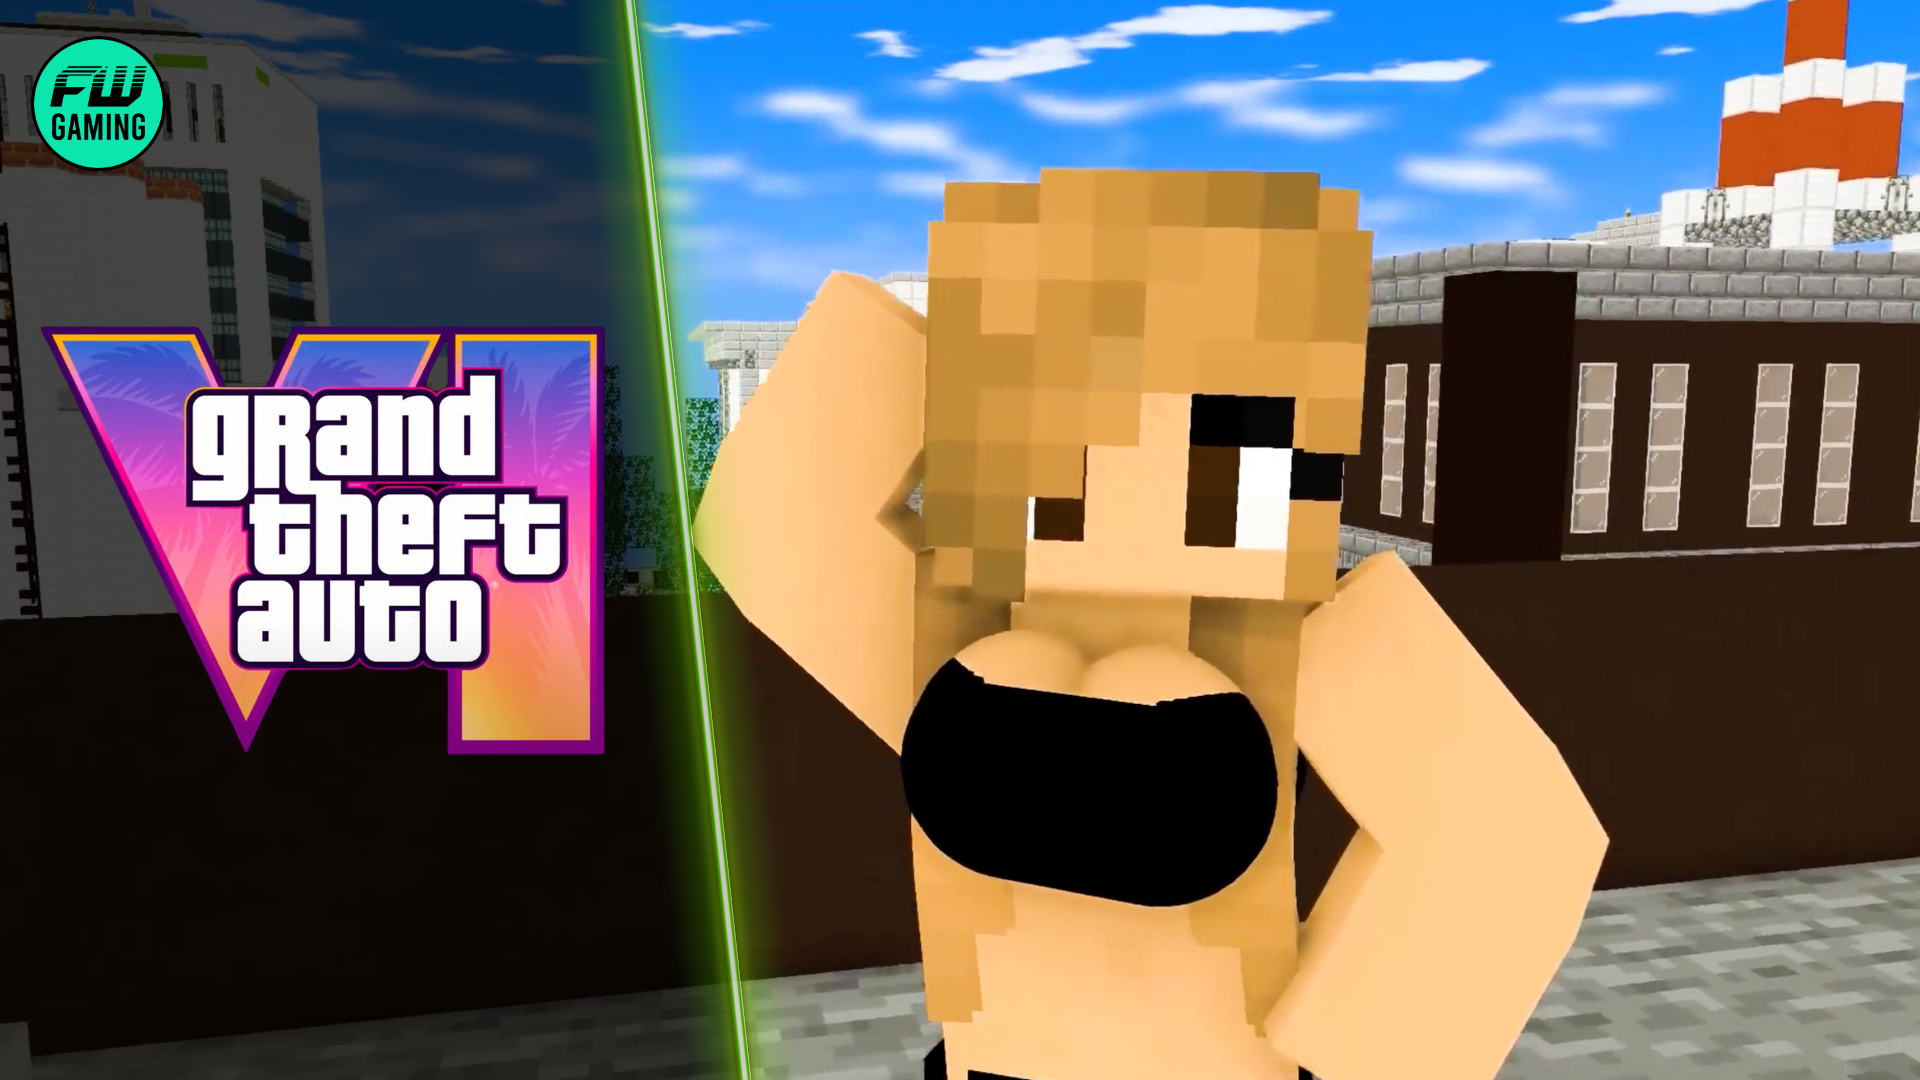 Fans Recreate the GTA 6 Trailer With a Minecraft Twist